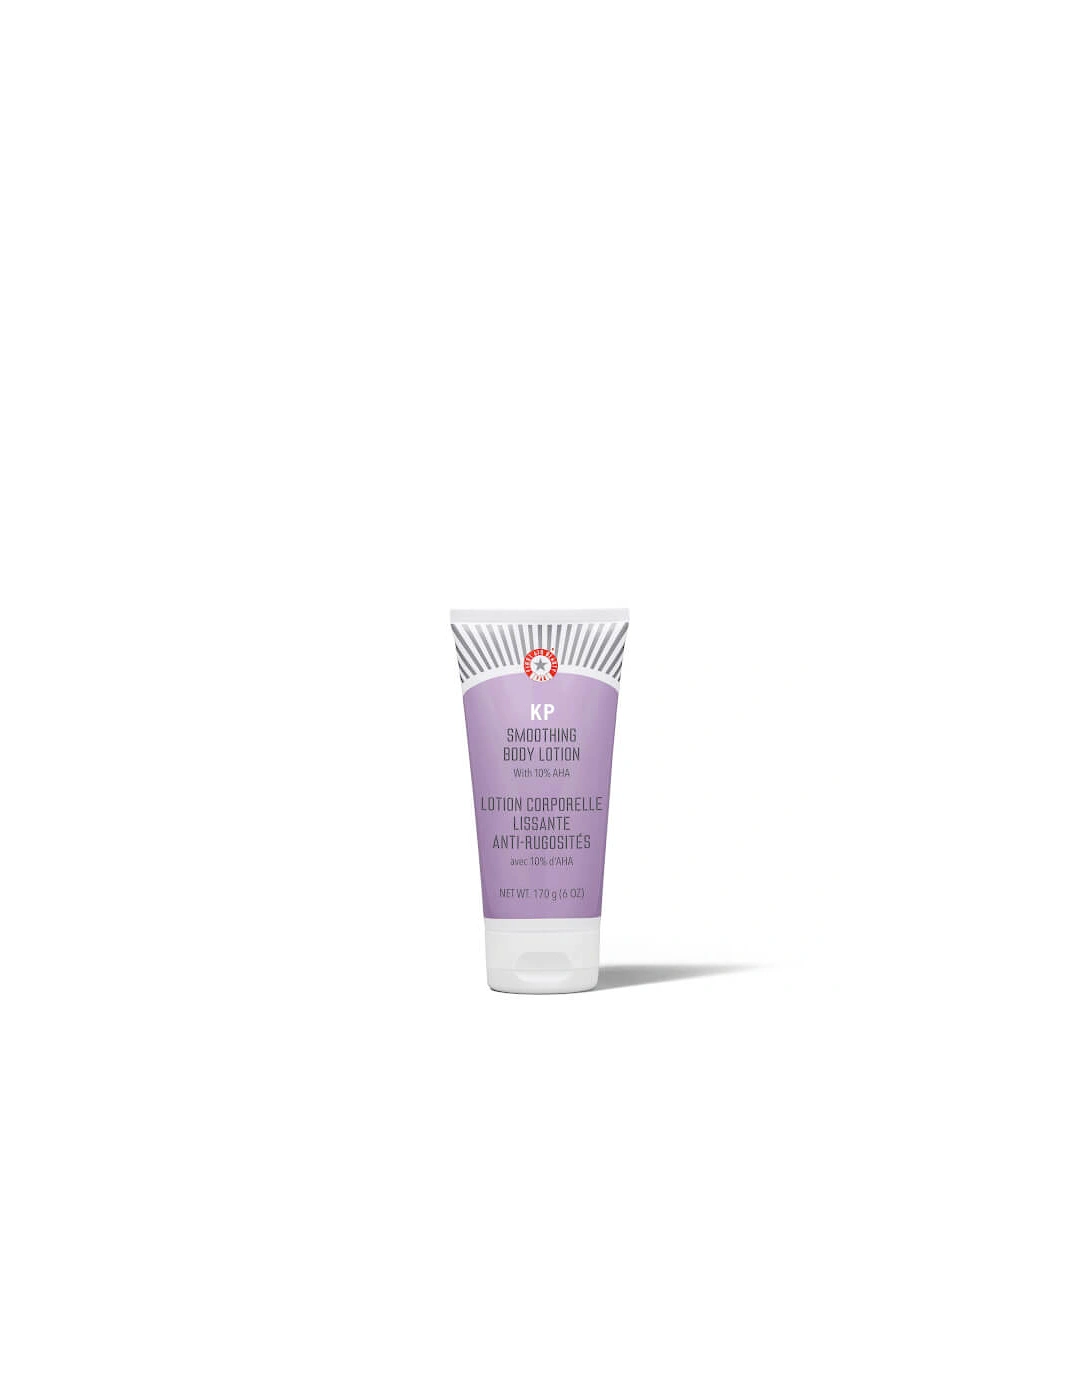 KP Smoothing Body Lotion with 10% AHA 170g - First Aid Beauty, 2 of 1